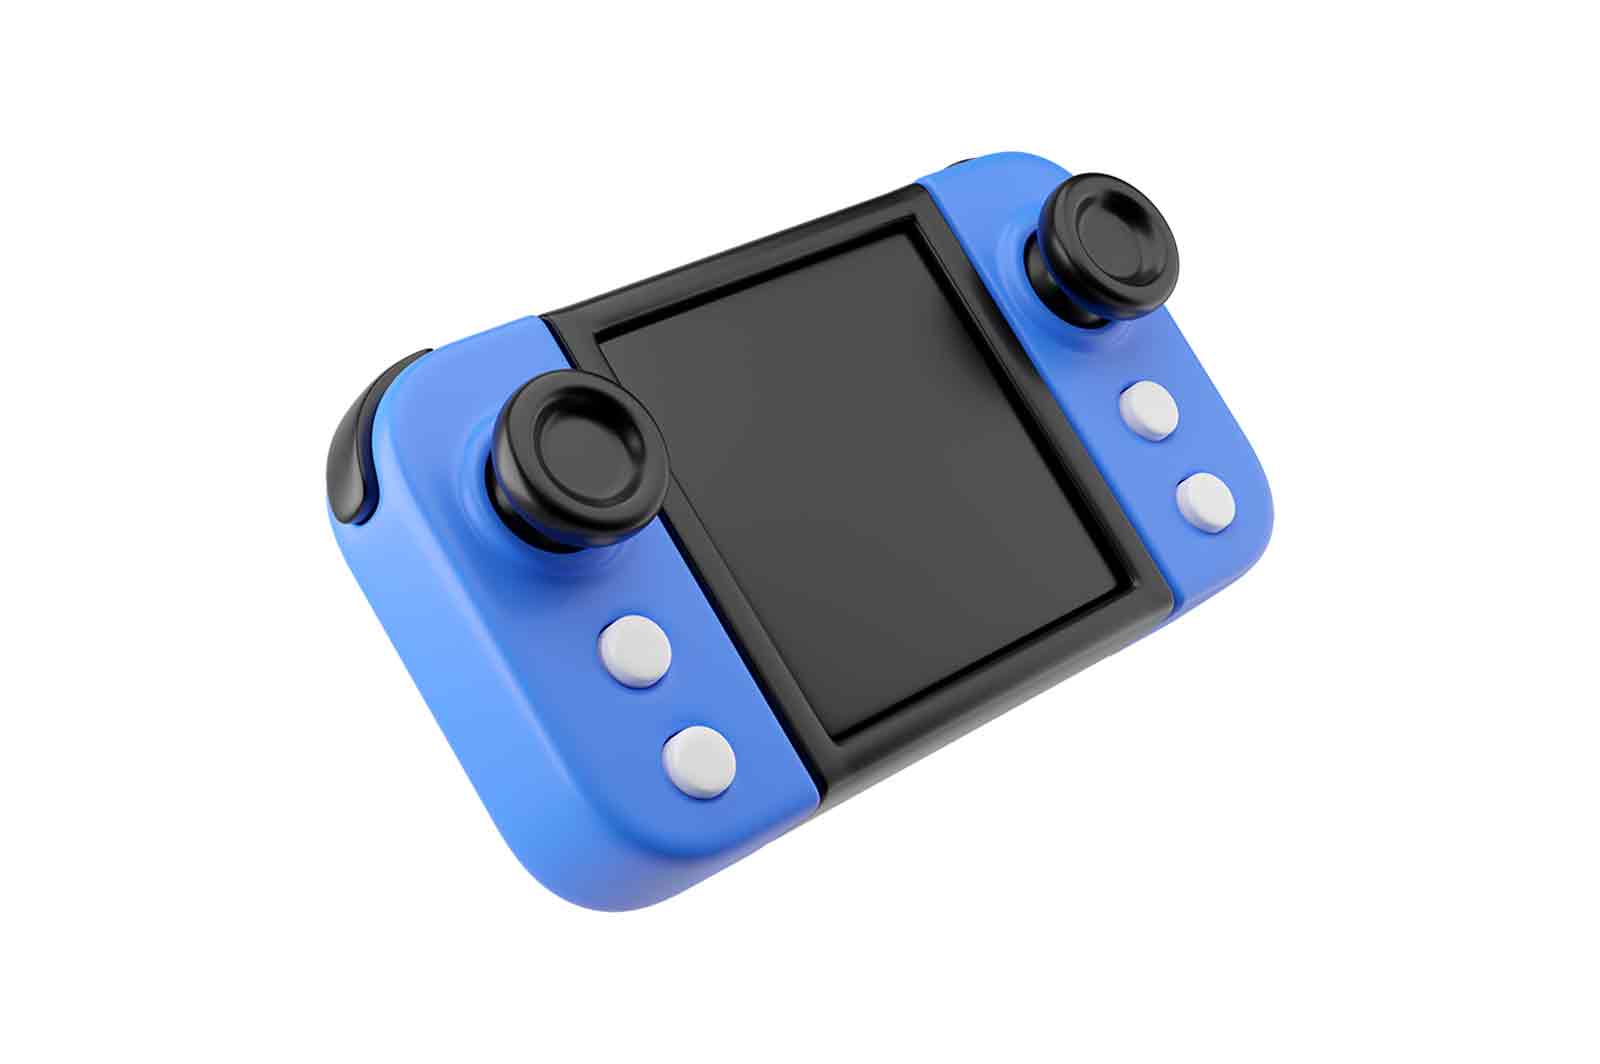 Handheld game console, 3d rendered illustration, with blue body and black screen. Two joysticks and six buttons on the top. Isolated on white background.